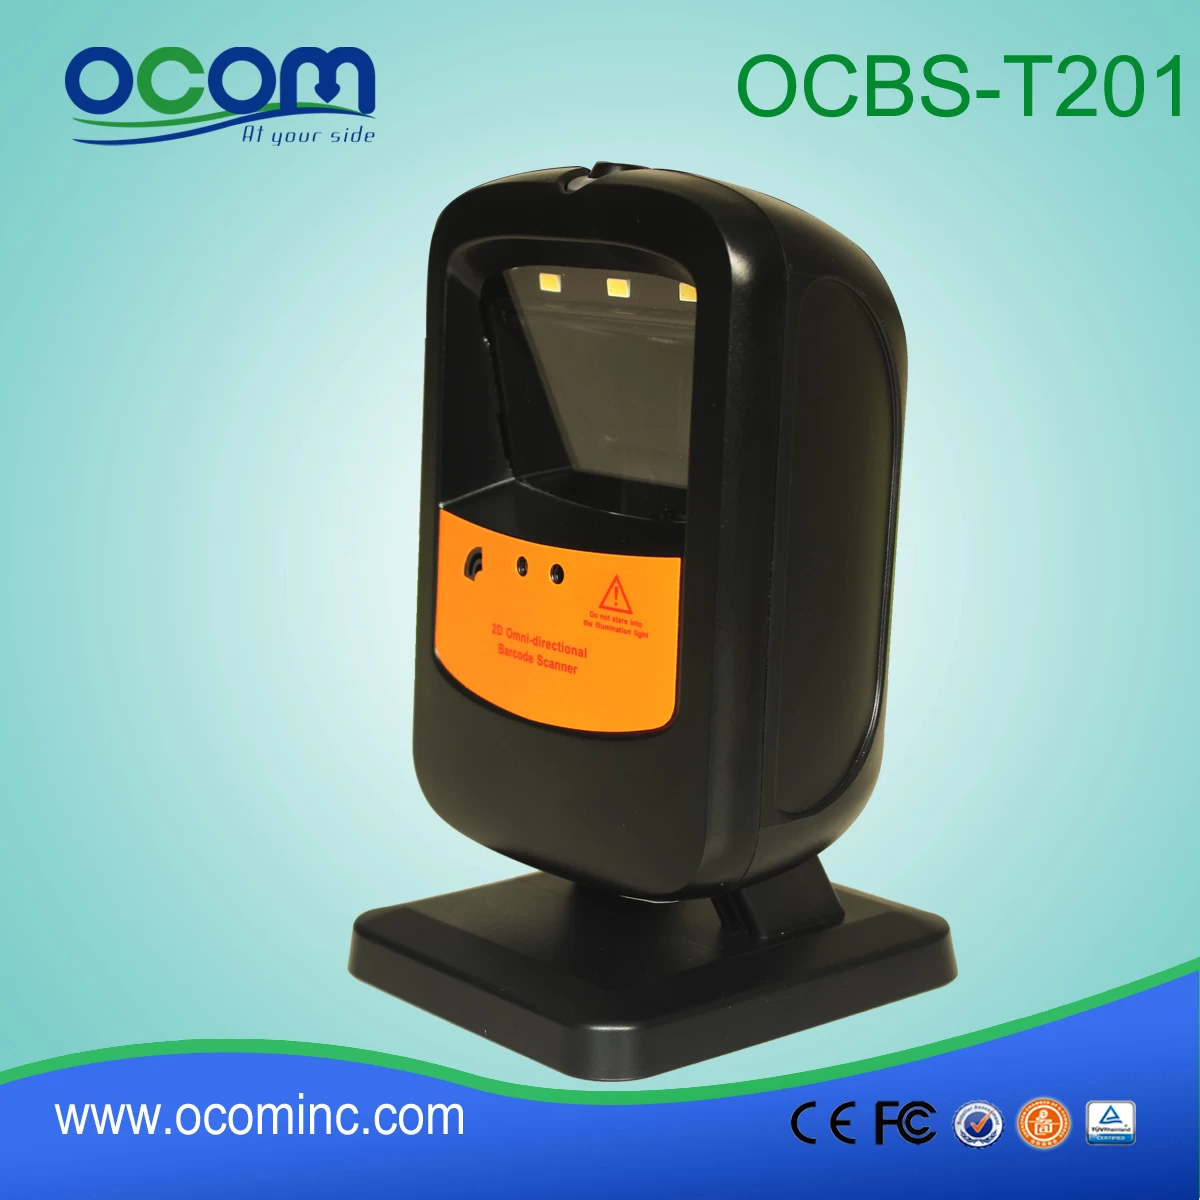 OCBS-T201:flatbed barcode scanner inventory, cheap barcode scanner